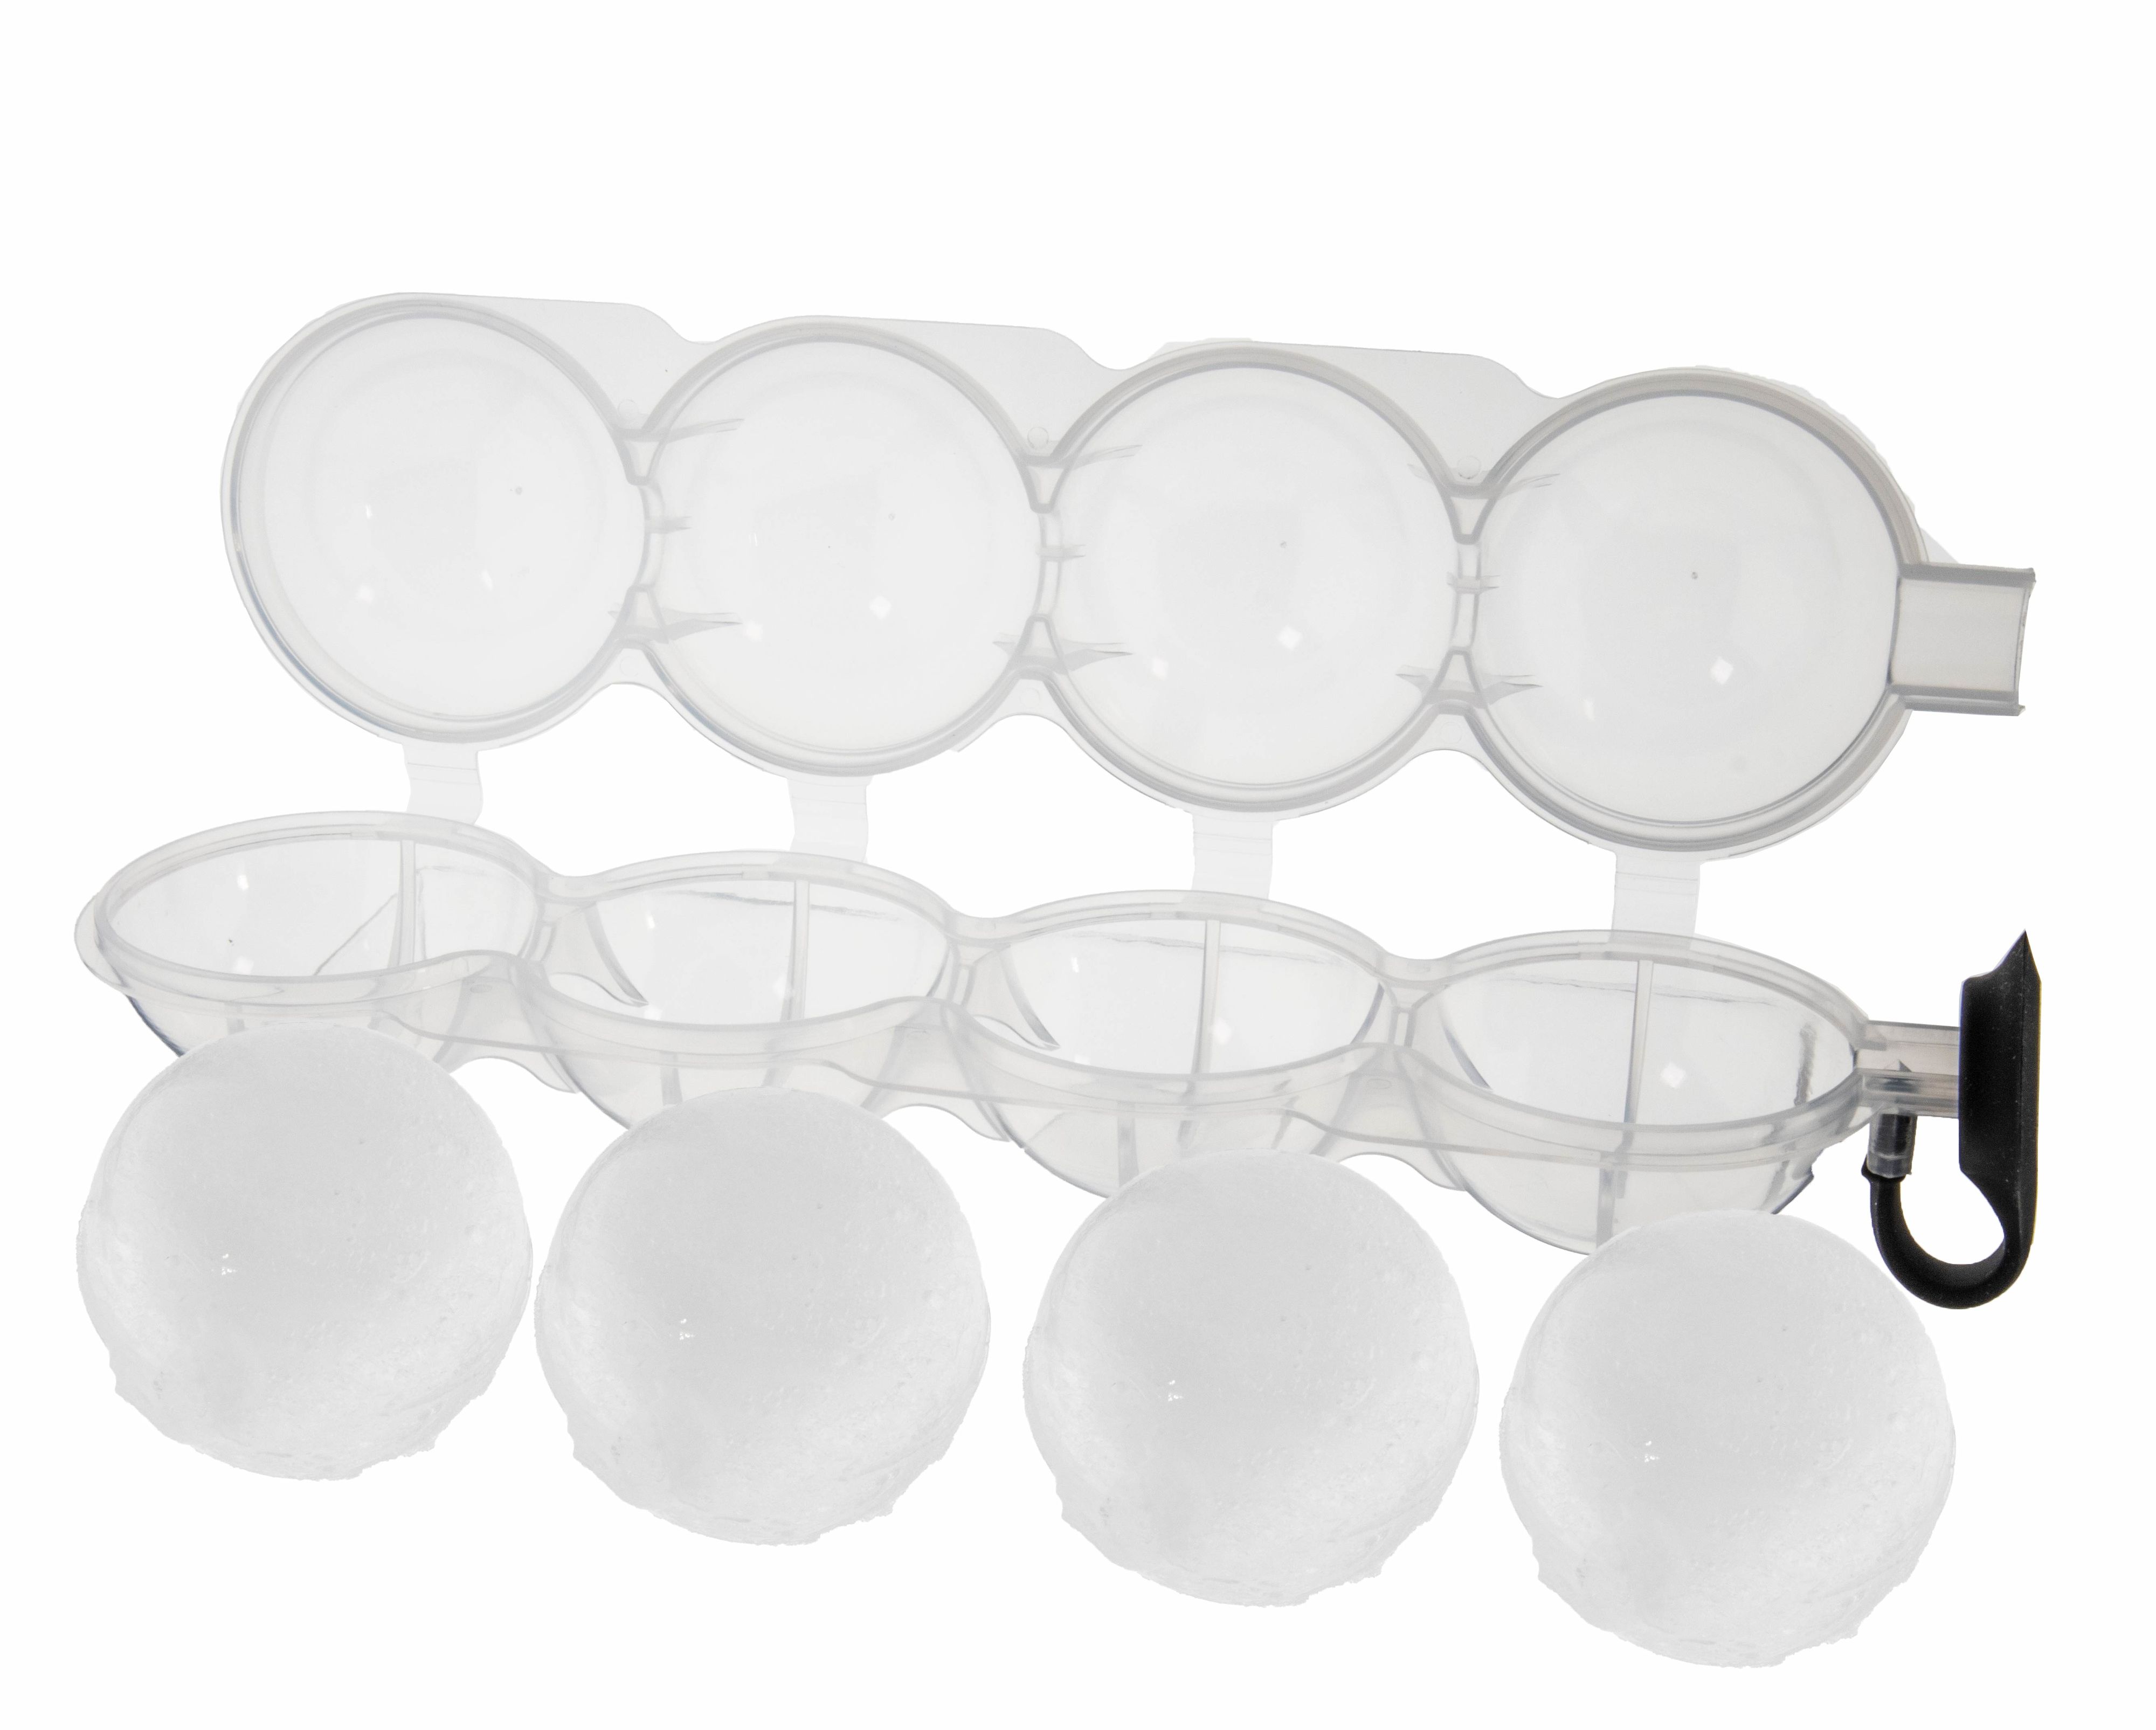 https://www.yourstoreonline.net/id4039242/name/largezoom_1/round-circular-ice-ball-maker-mold-tray-4-perfect-refreshing-ice-sphere-cube-balls.jpg